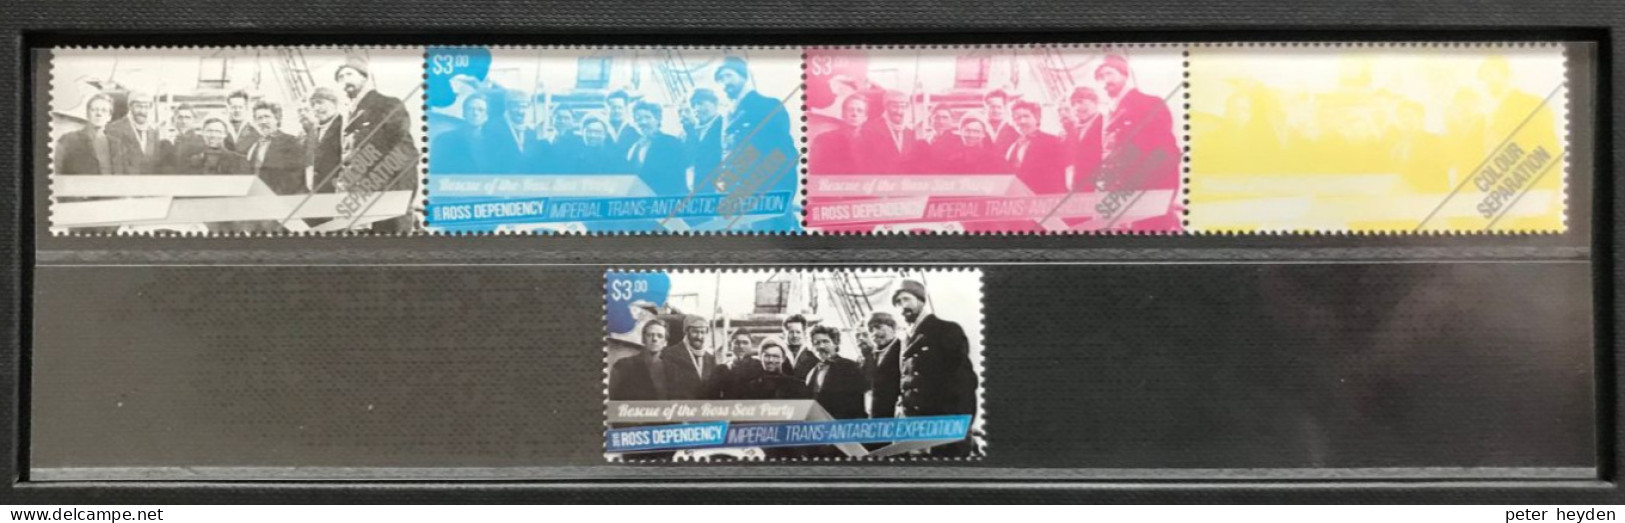 ROSS 2015 ~ DeLuxe Set With MNH ** Special Block, Se-tenant Block Of 6, Color Seperation Strip, FDC Etc. - Nuevos